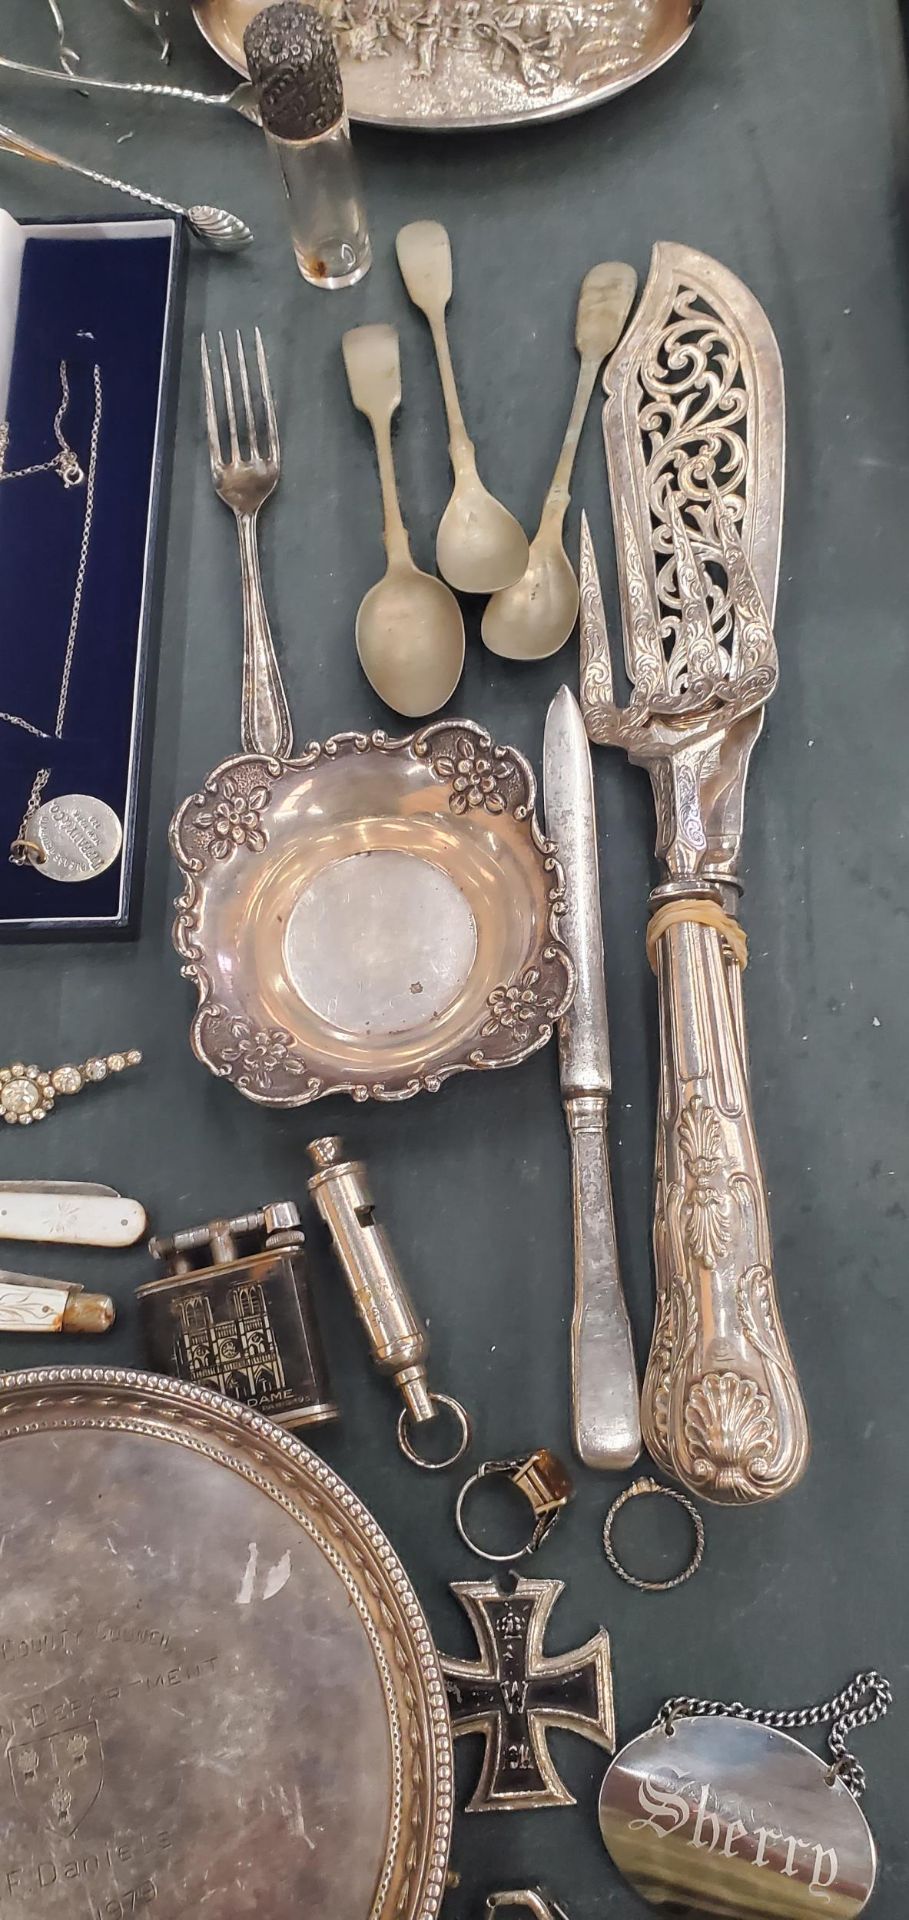 A MIXED LOT OF SILVER AND SILVER PLATED ITEMS, FISH SERVERS, PHOTO FRAME, SALVER, ETC - Image 4 of 4